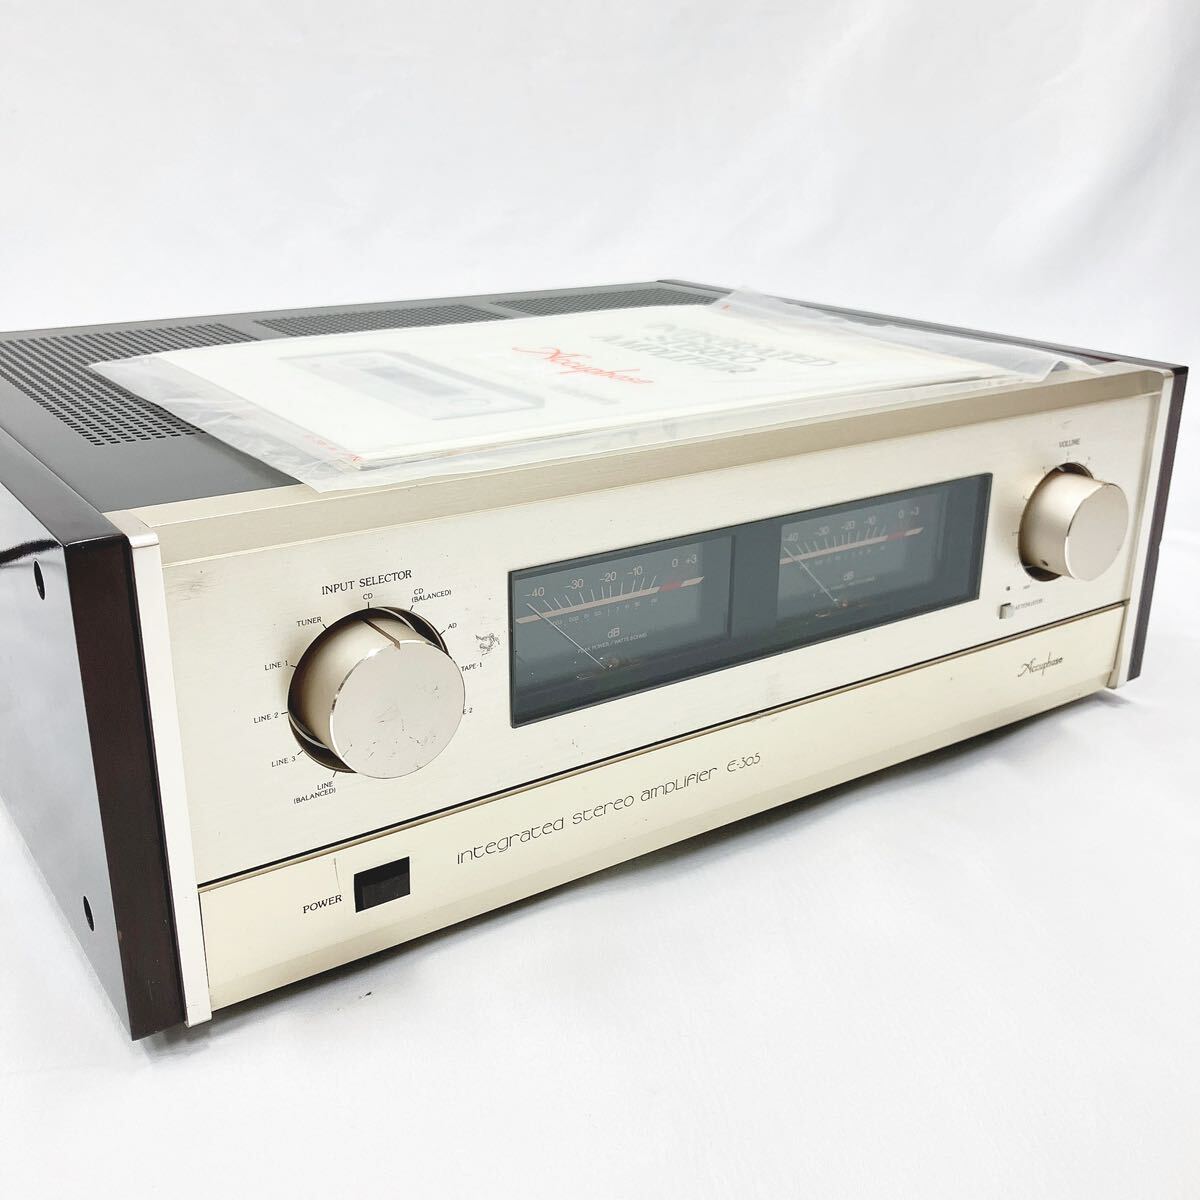 Accuphase Accuphase E-305 pre-main amplifier audio equipment manual / booklet attaching addition photograph equipped 01-0315